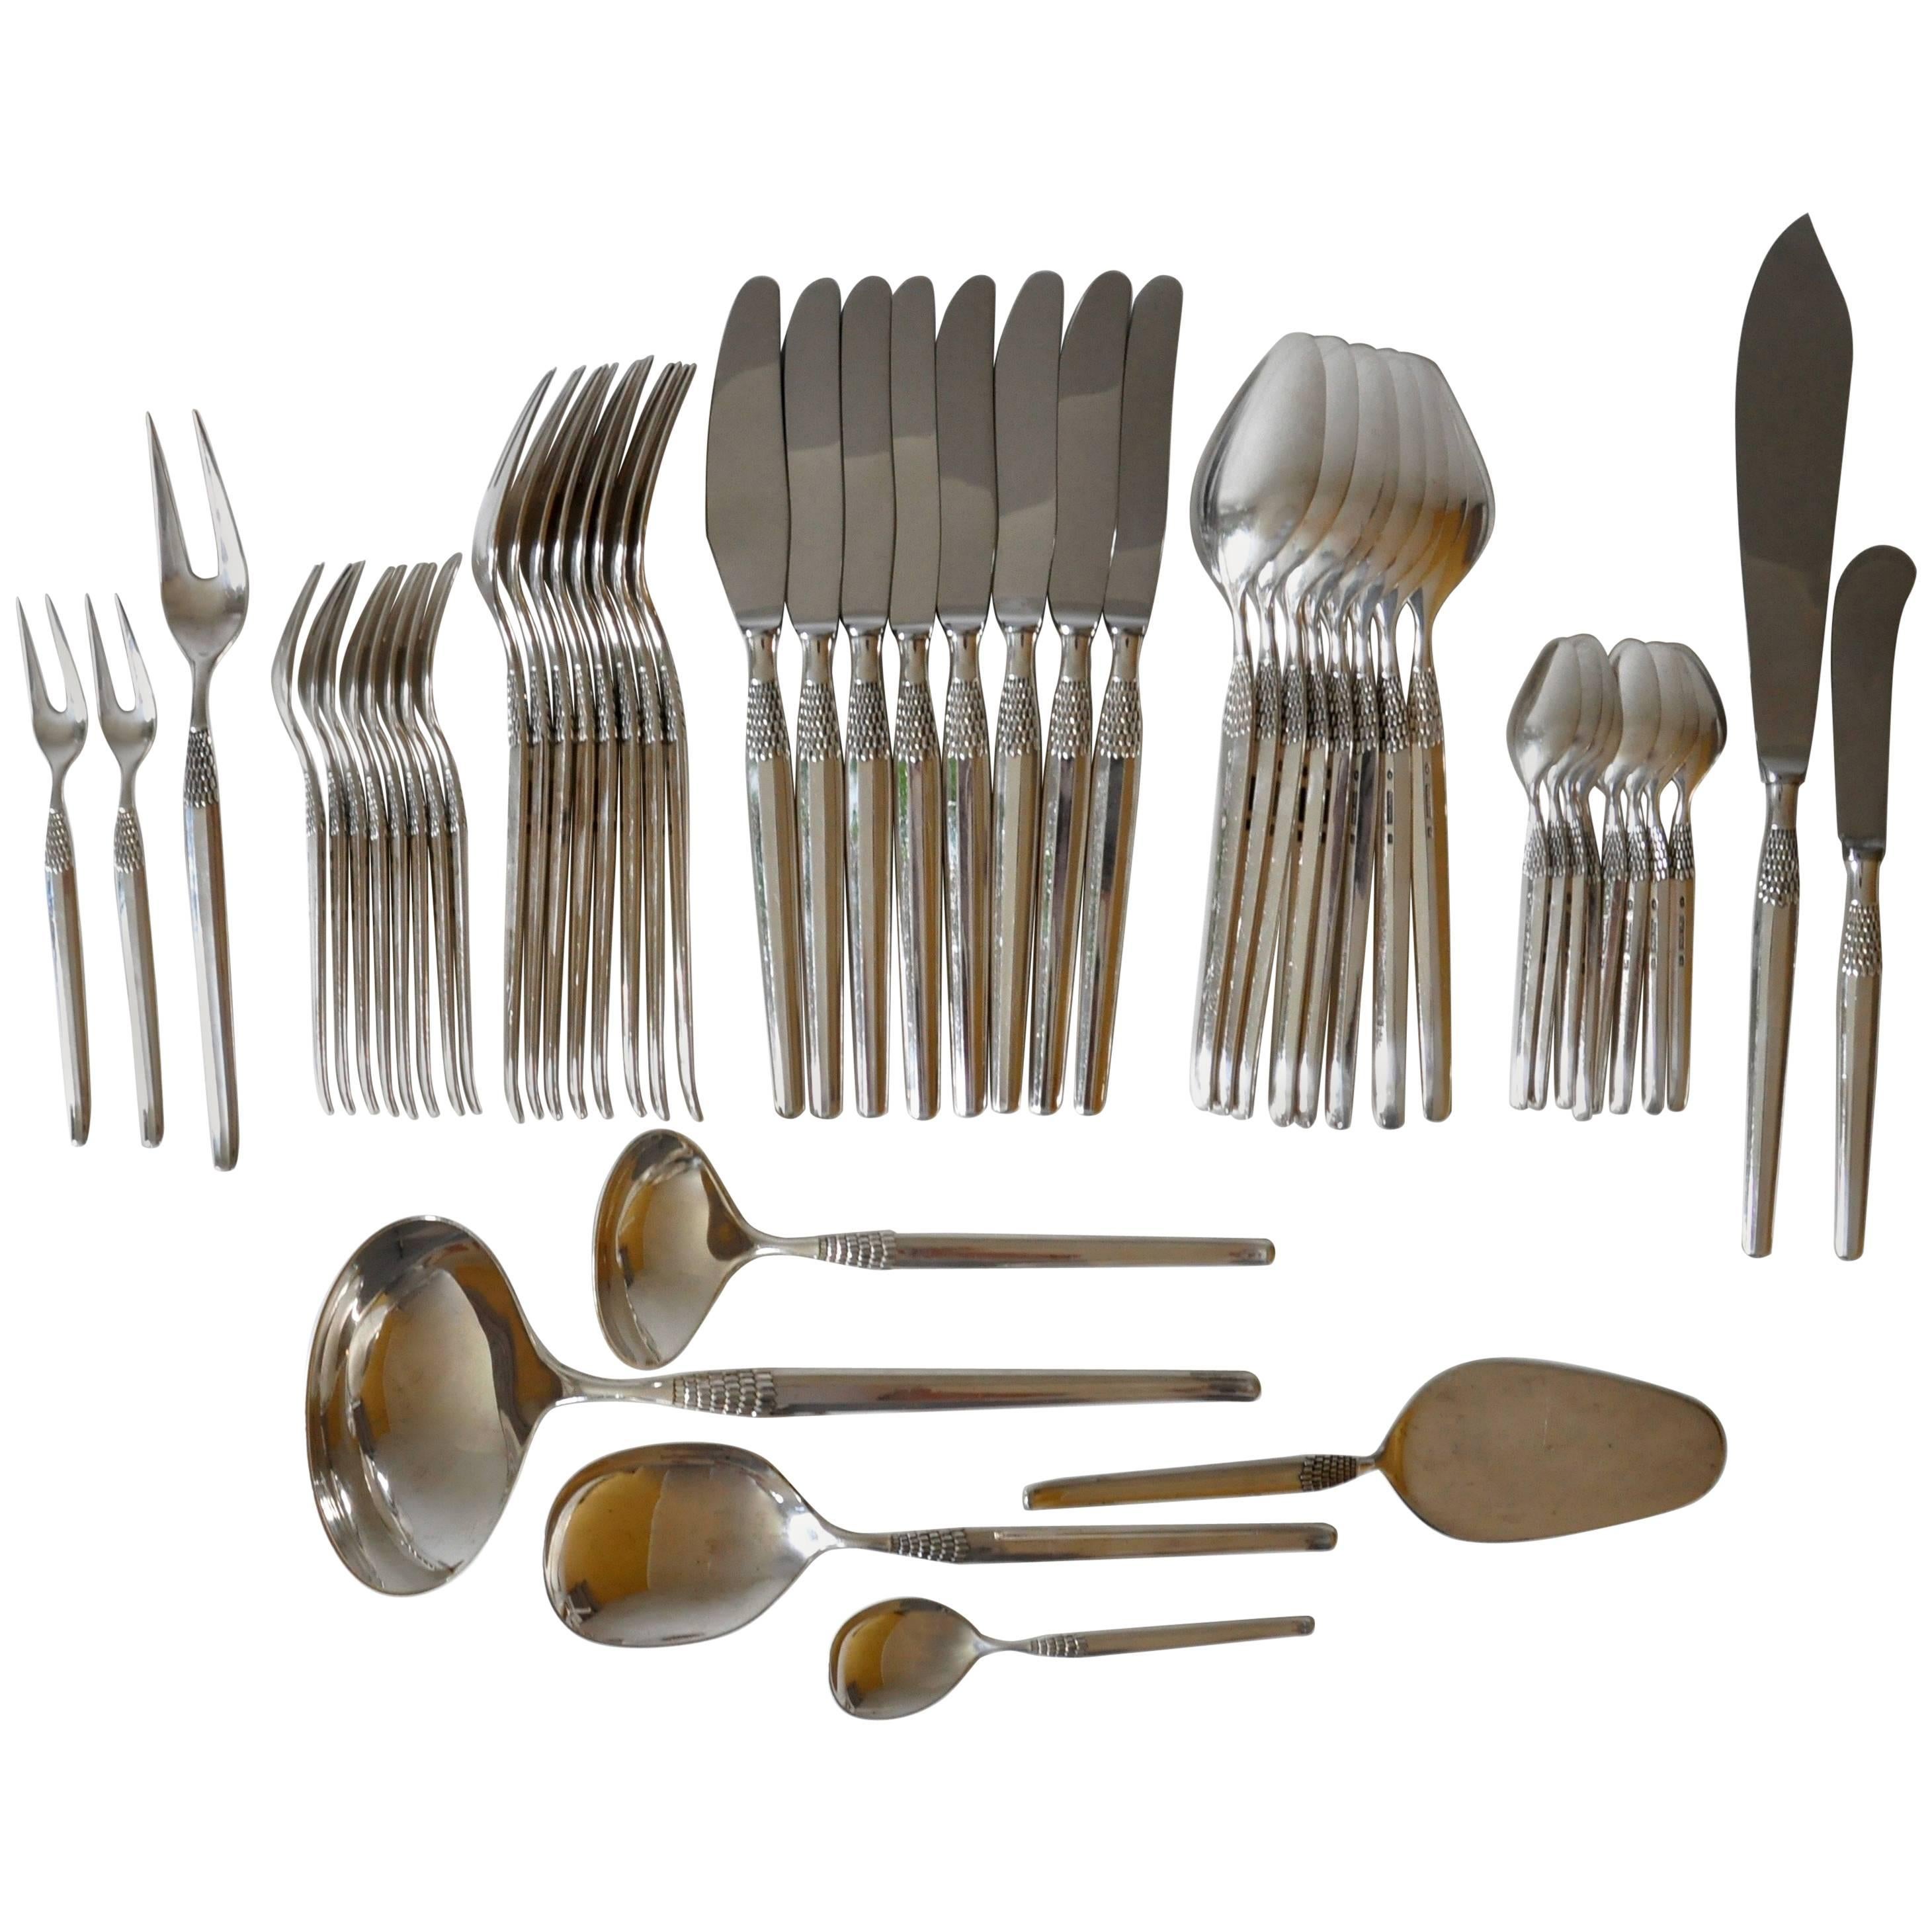 Set for 8 Pers Including Serving Cutlery "Cheri" By Henning Seidelin for Frigast